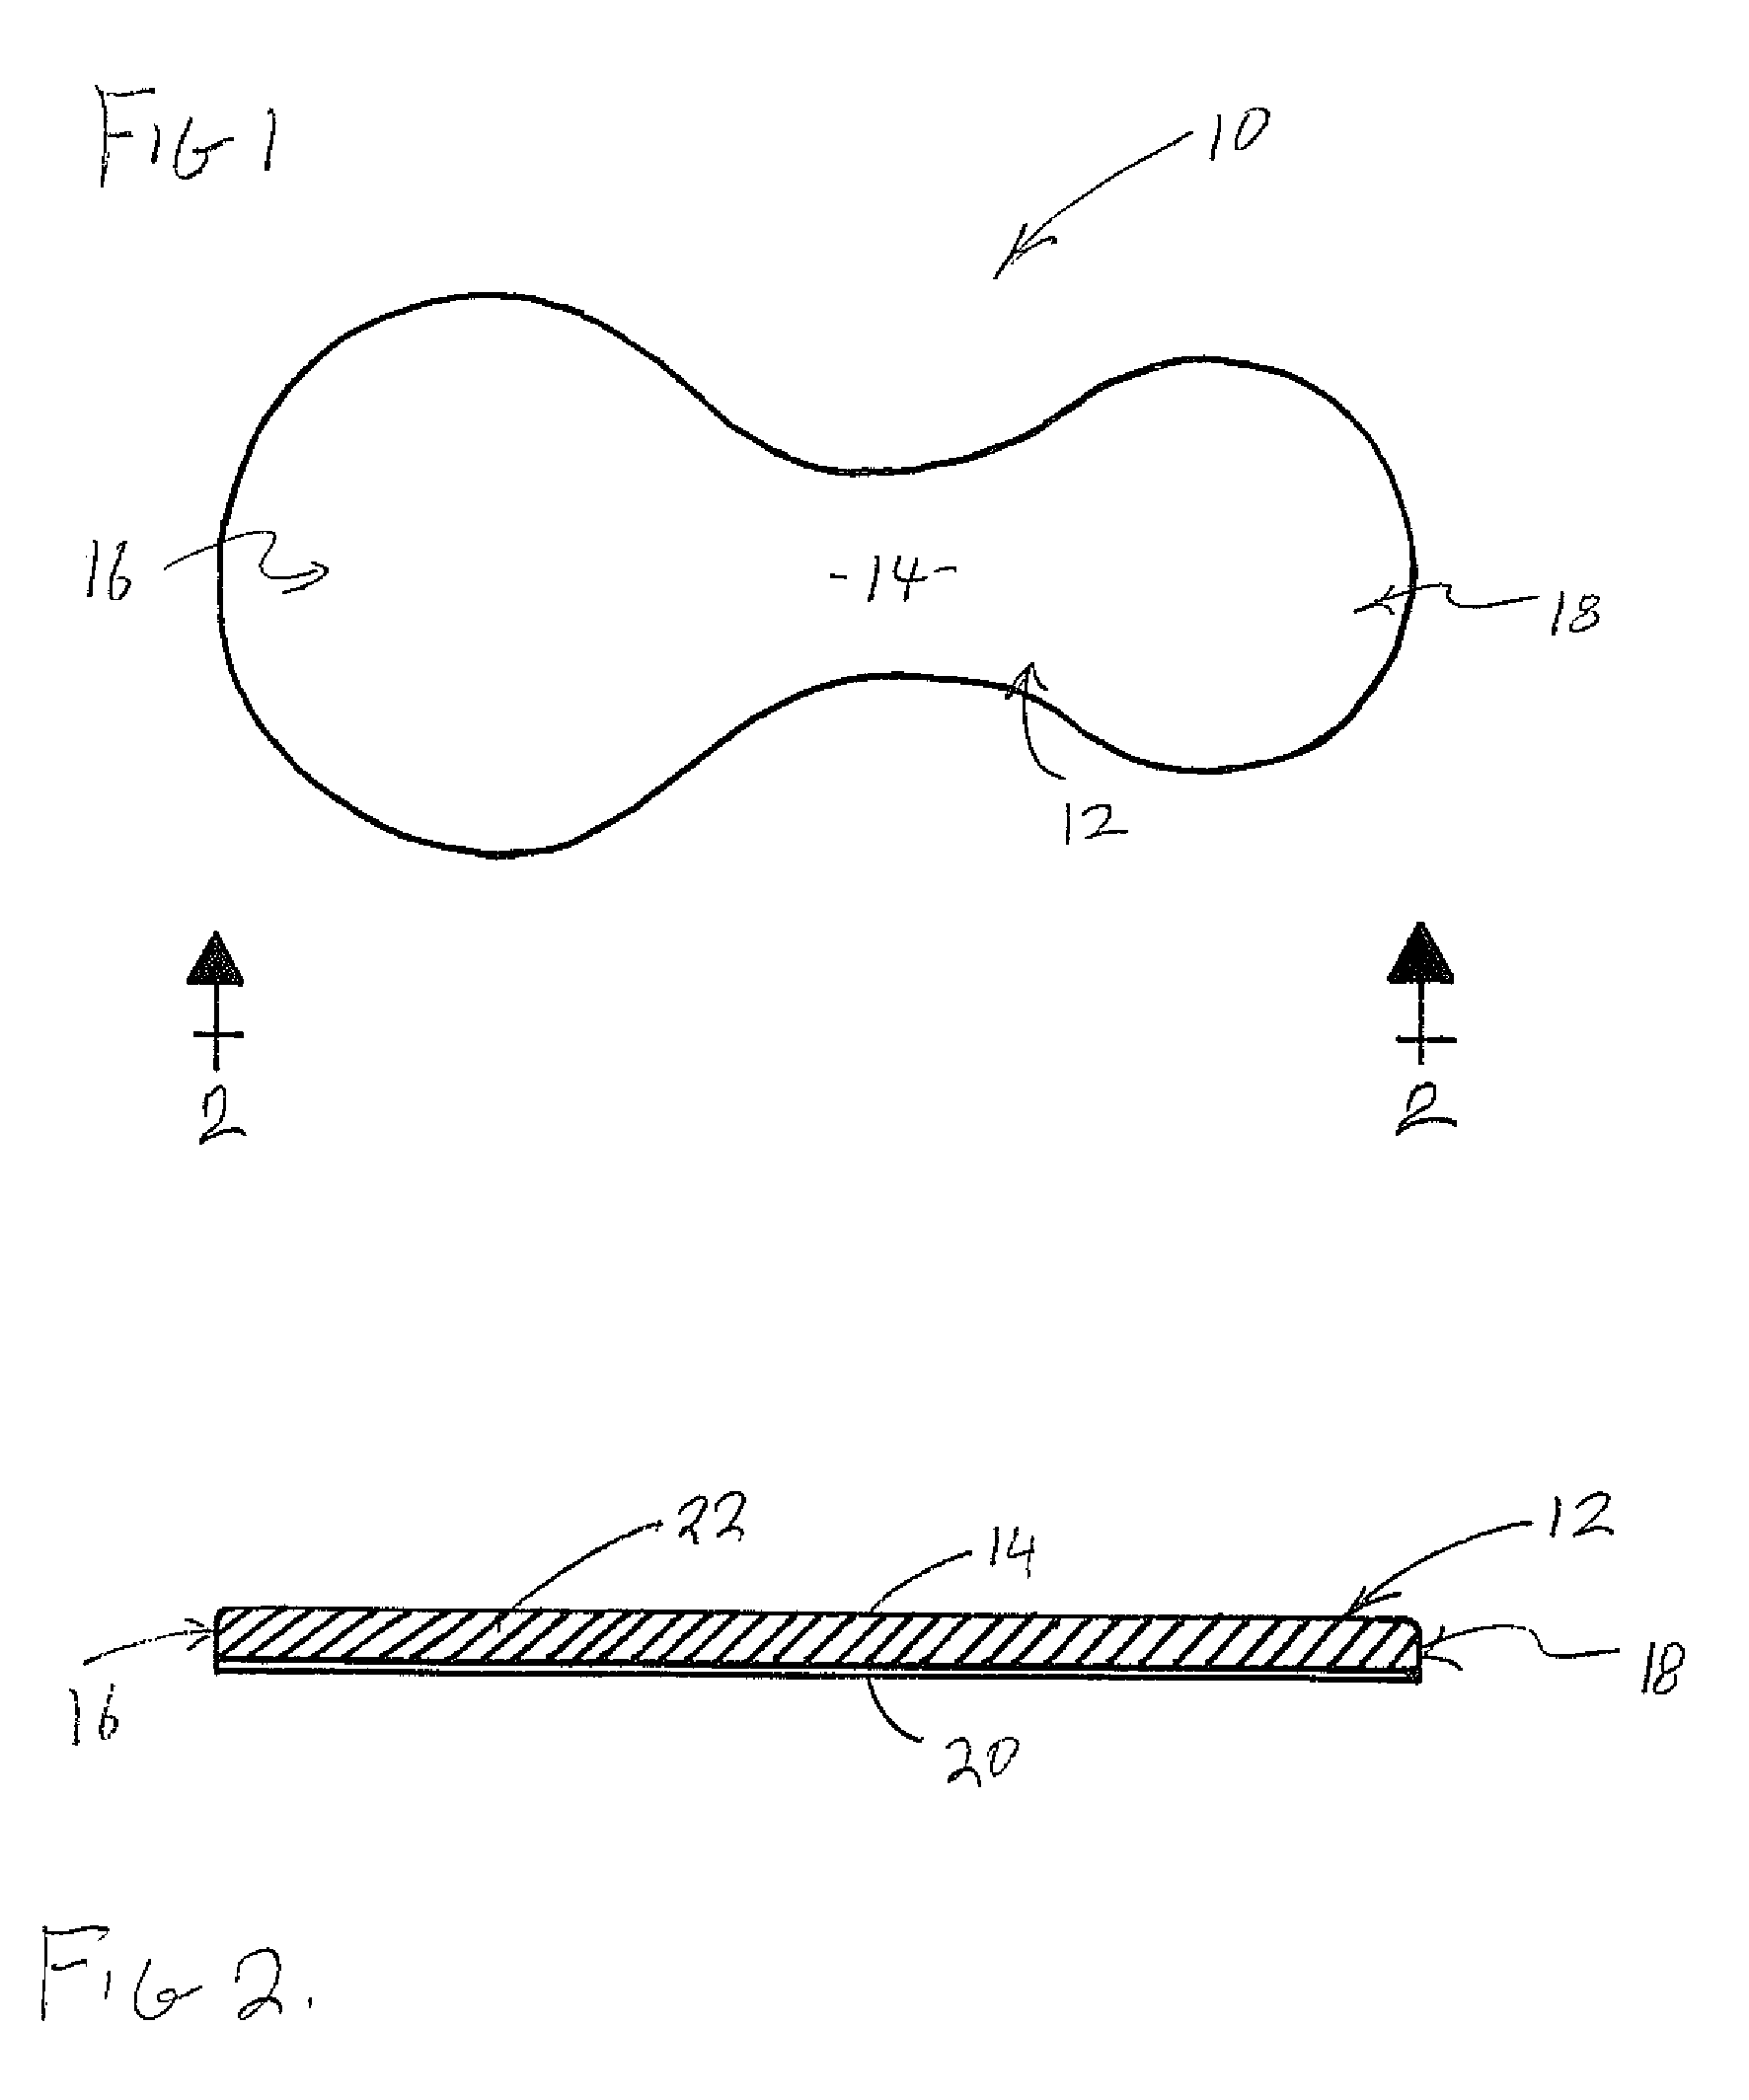 Hearing assistance device